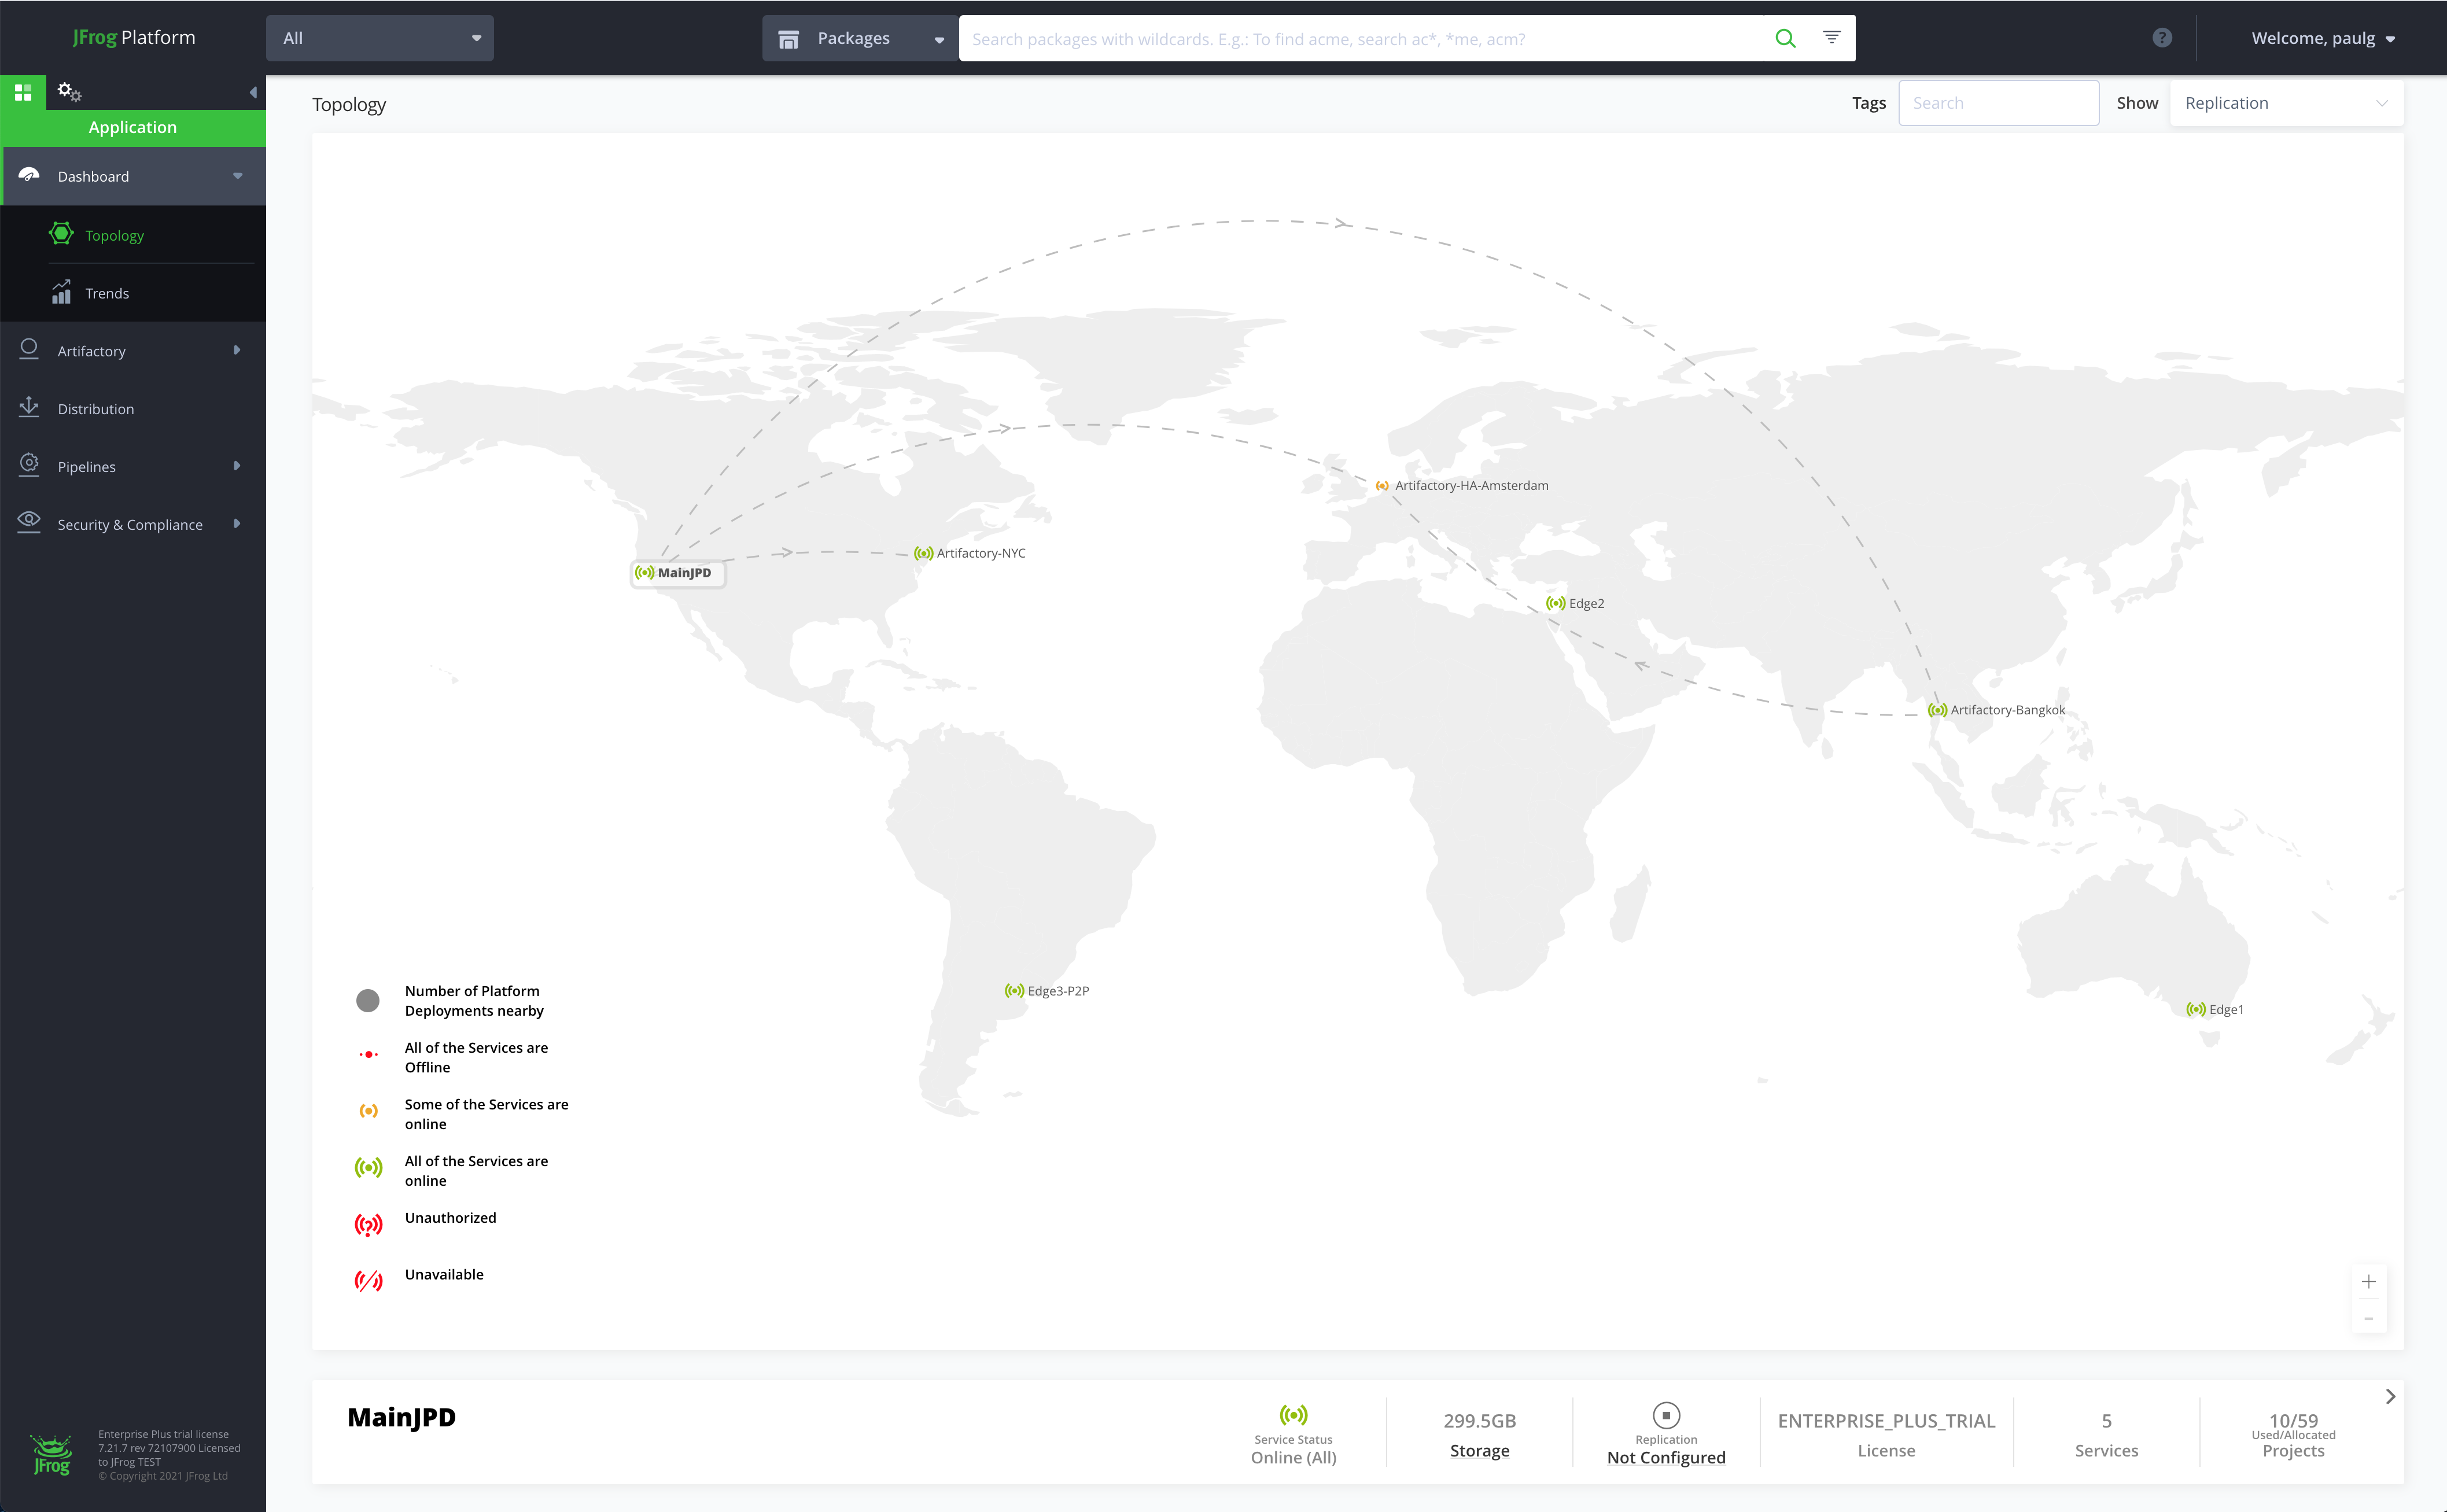 When You Login You Will See a Dashboard Showing your Network Topology